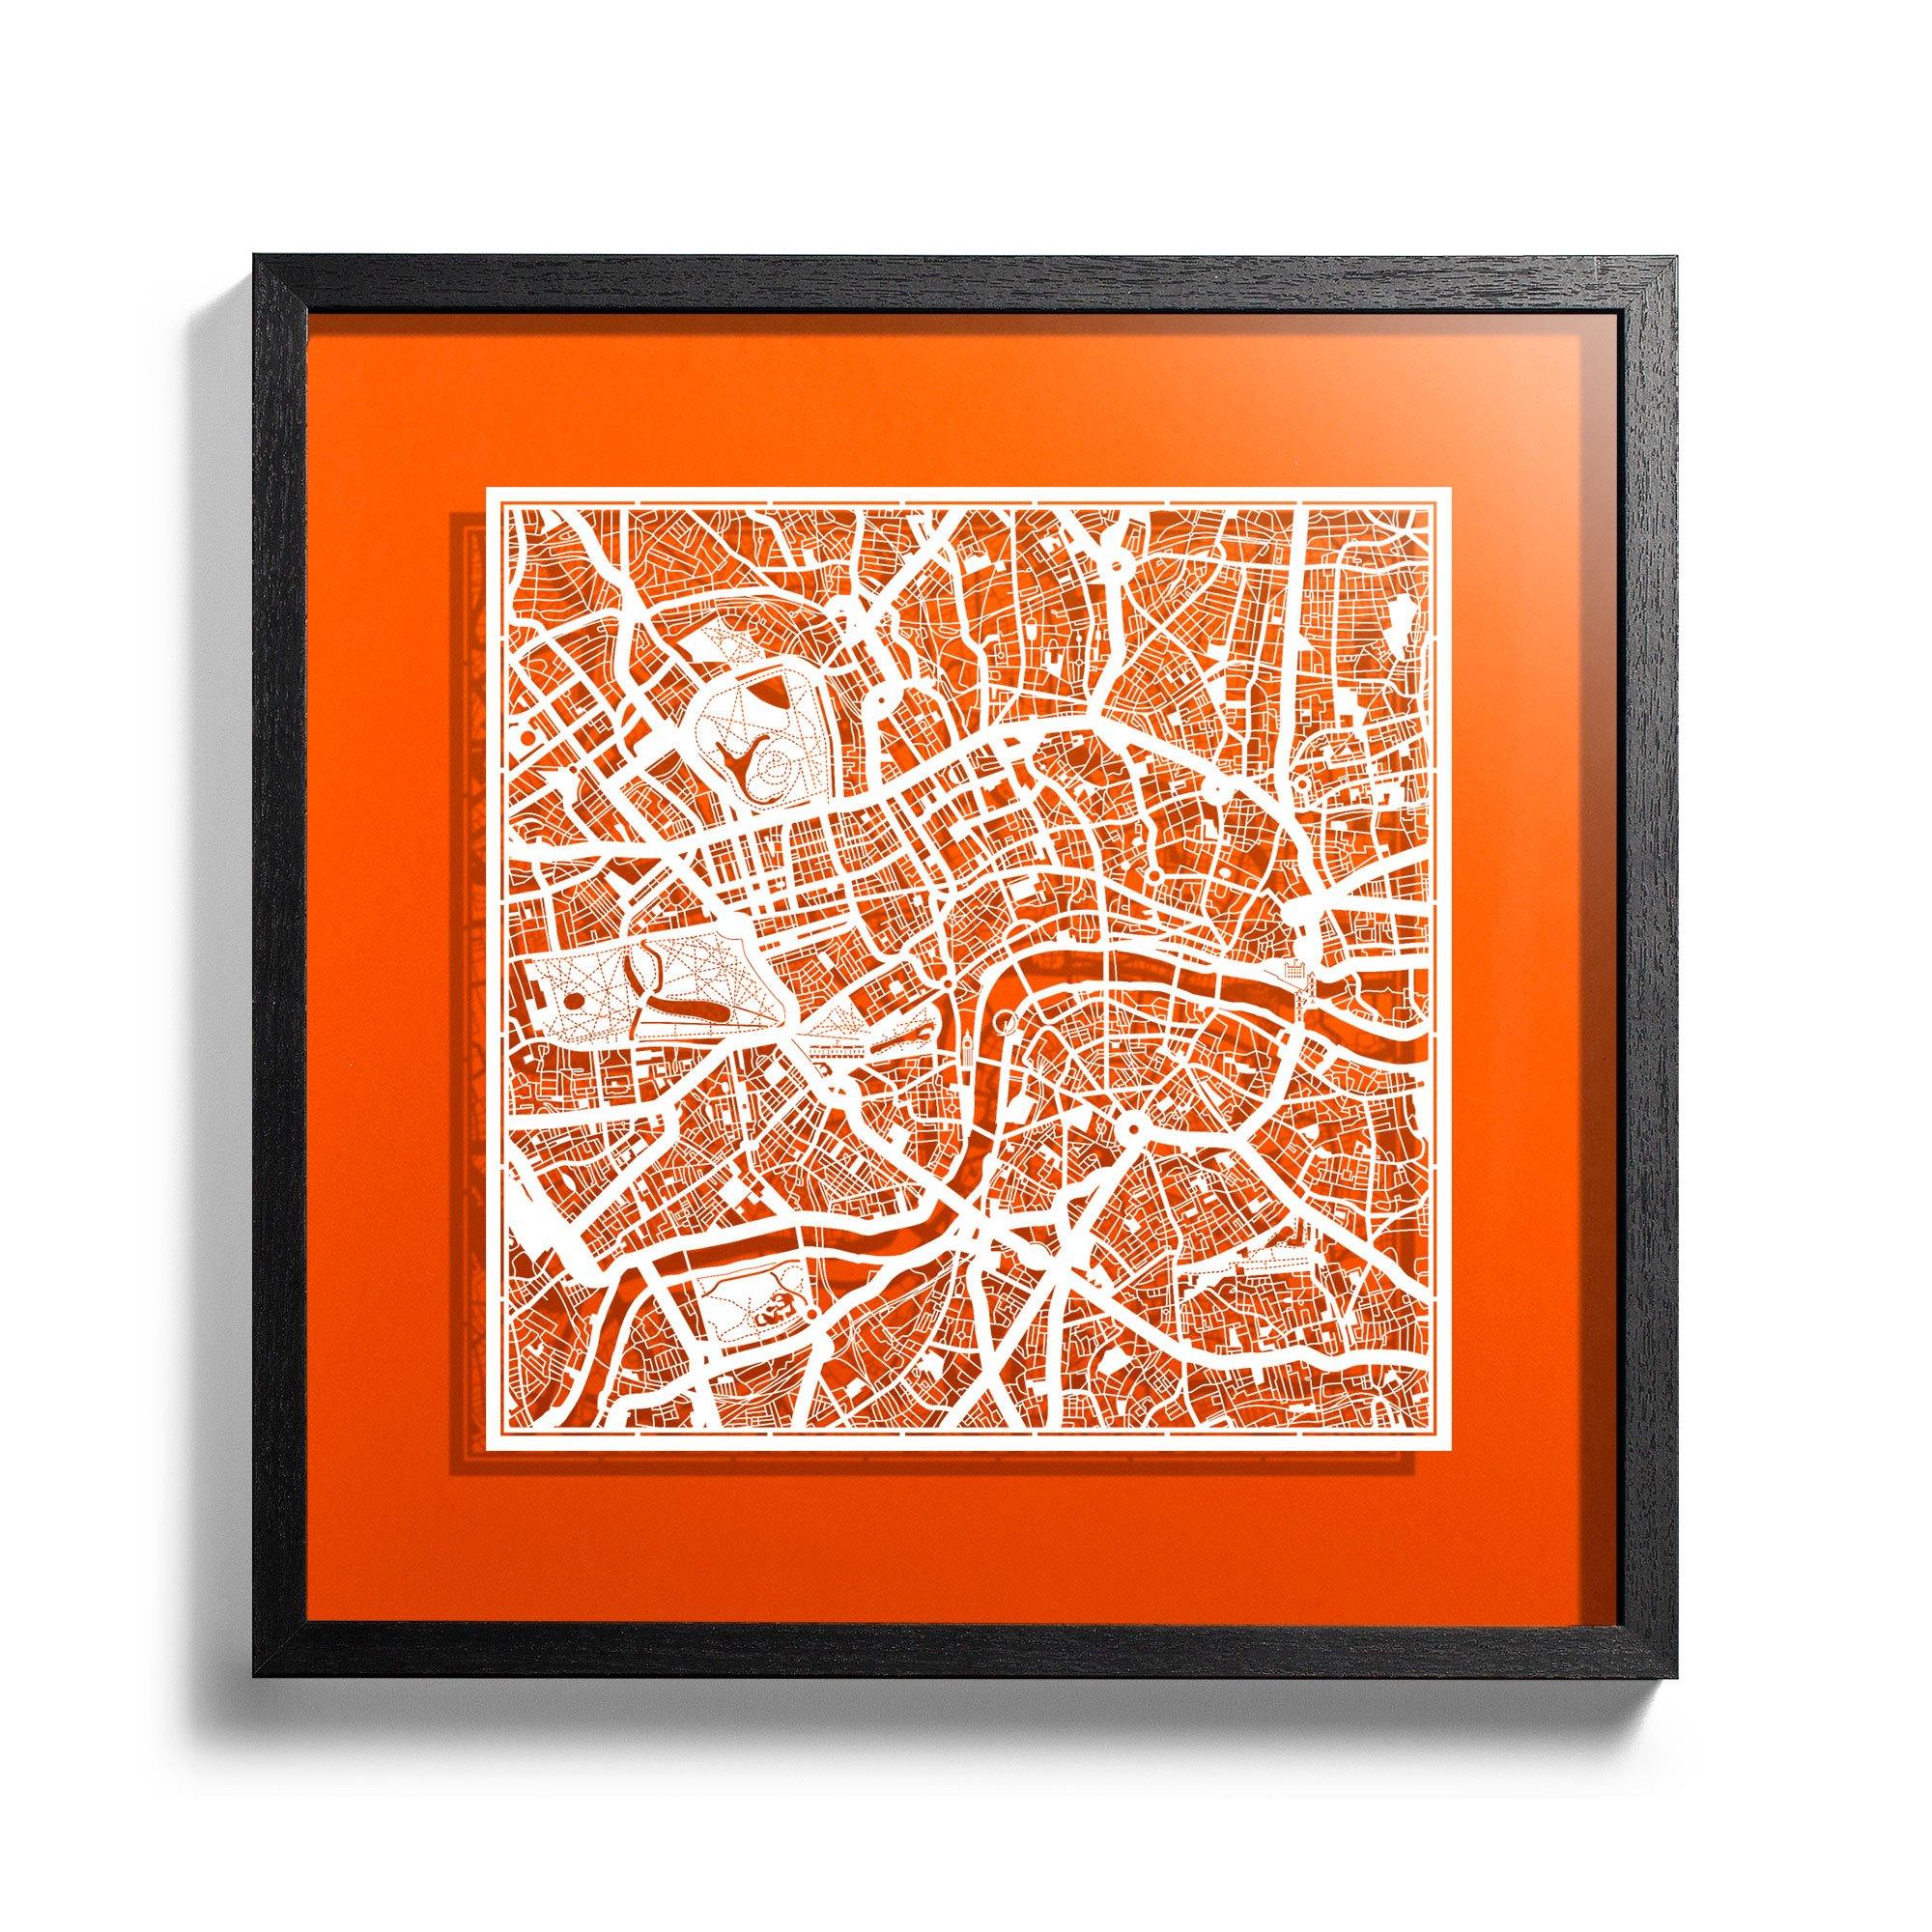 Paper cut maps framed, other cities 18 in - o3designstudio